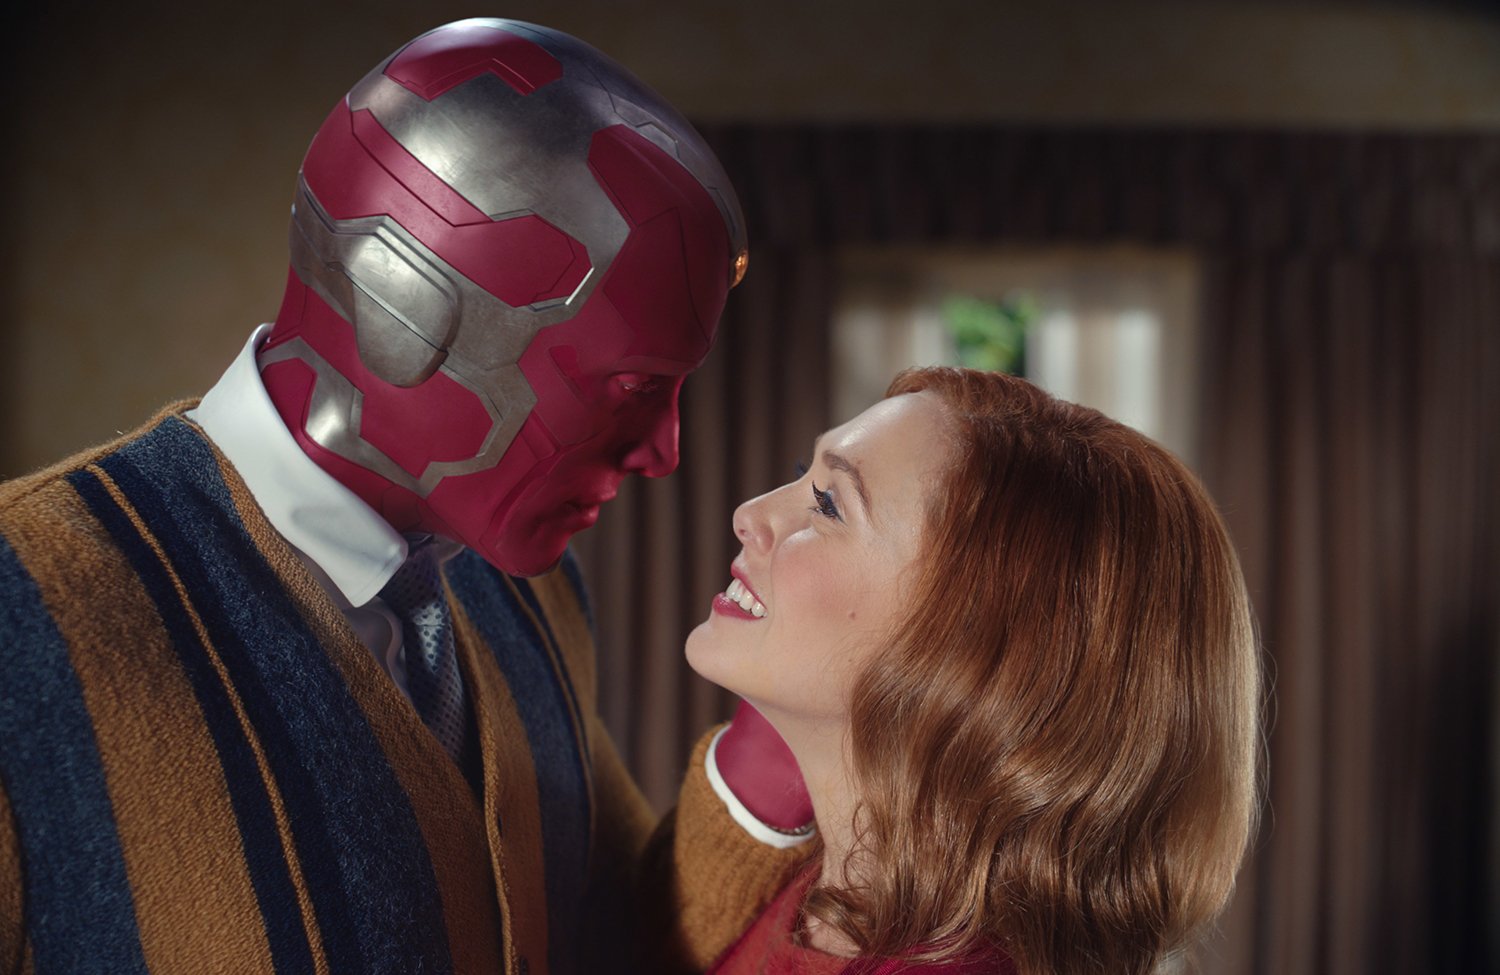 WandaVision stars Paul Bettany as Vision and Elizabeth Olsen as Wanda Maximoff. The Marvel series received 23 Emmy nominations in 2021.